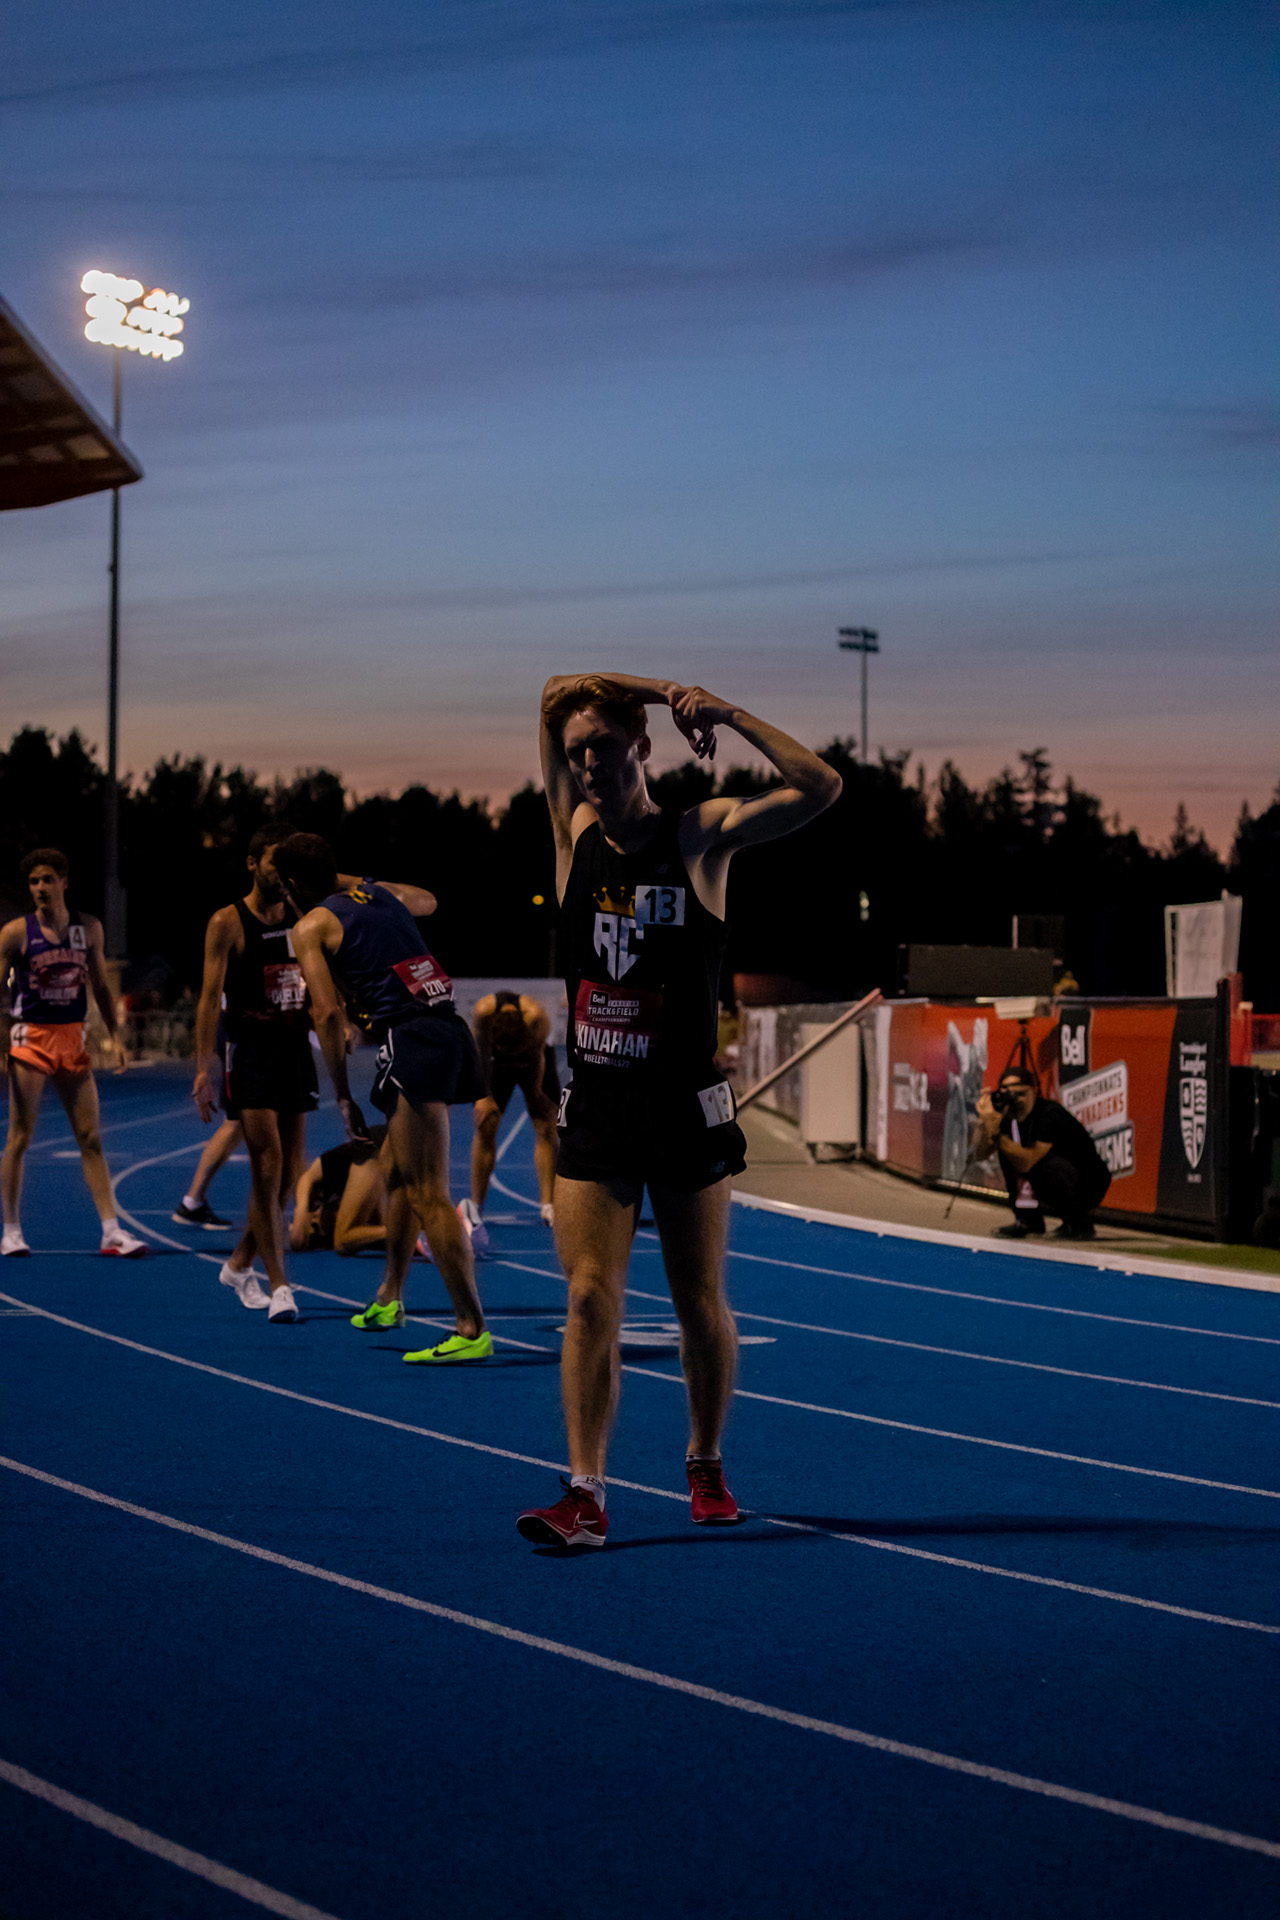 Running: Exhausted runner in a track and field stadium